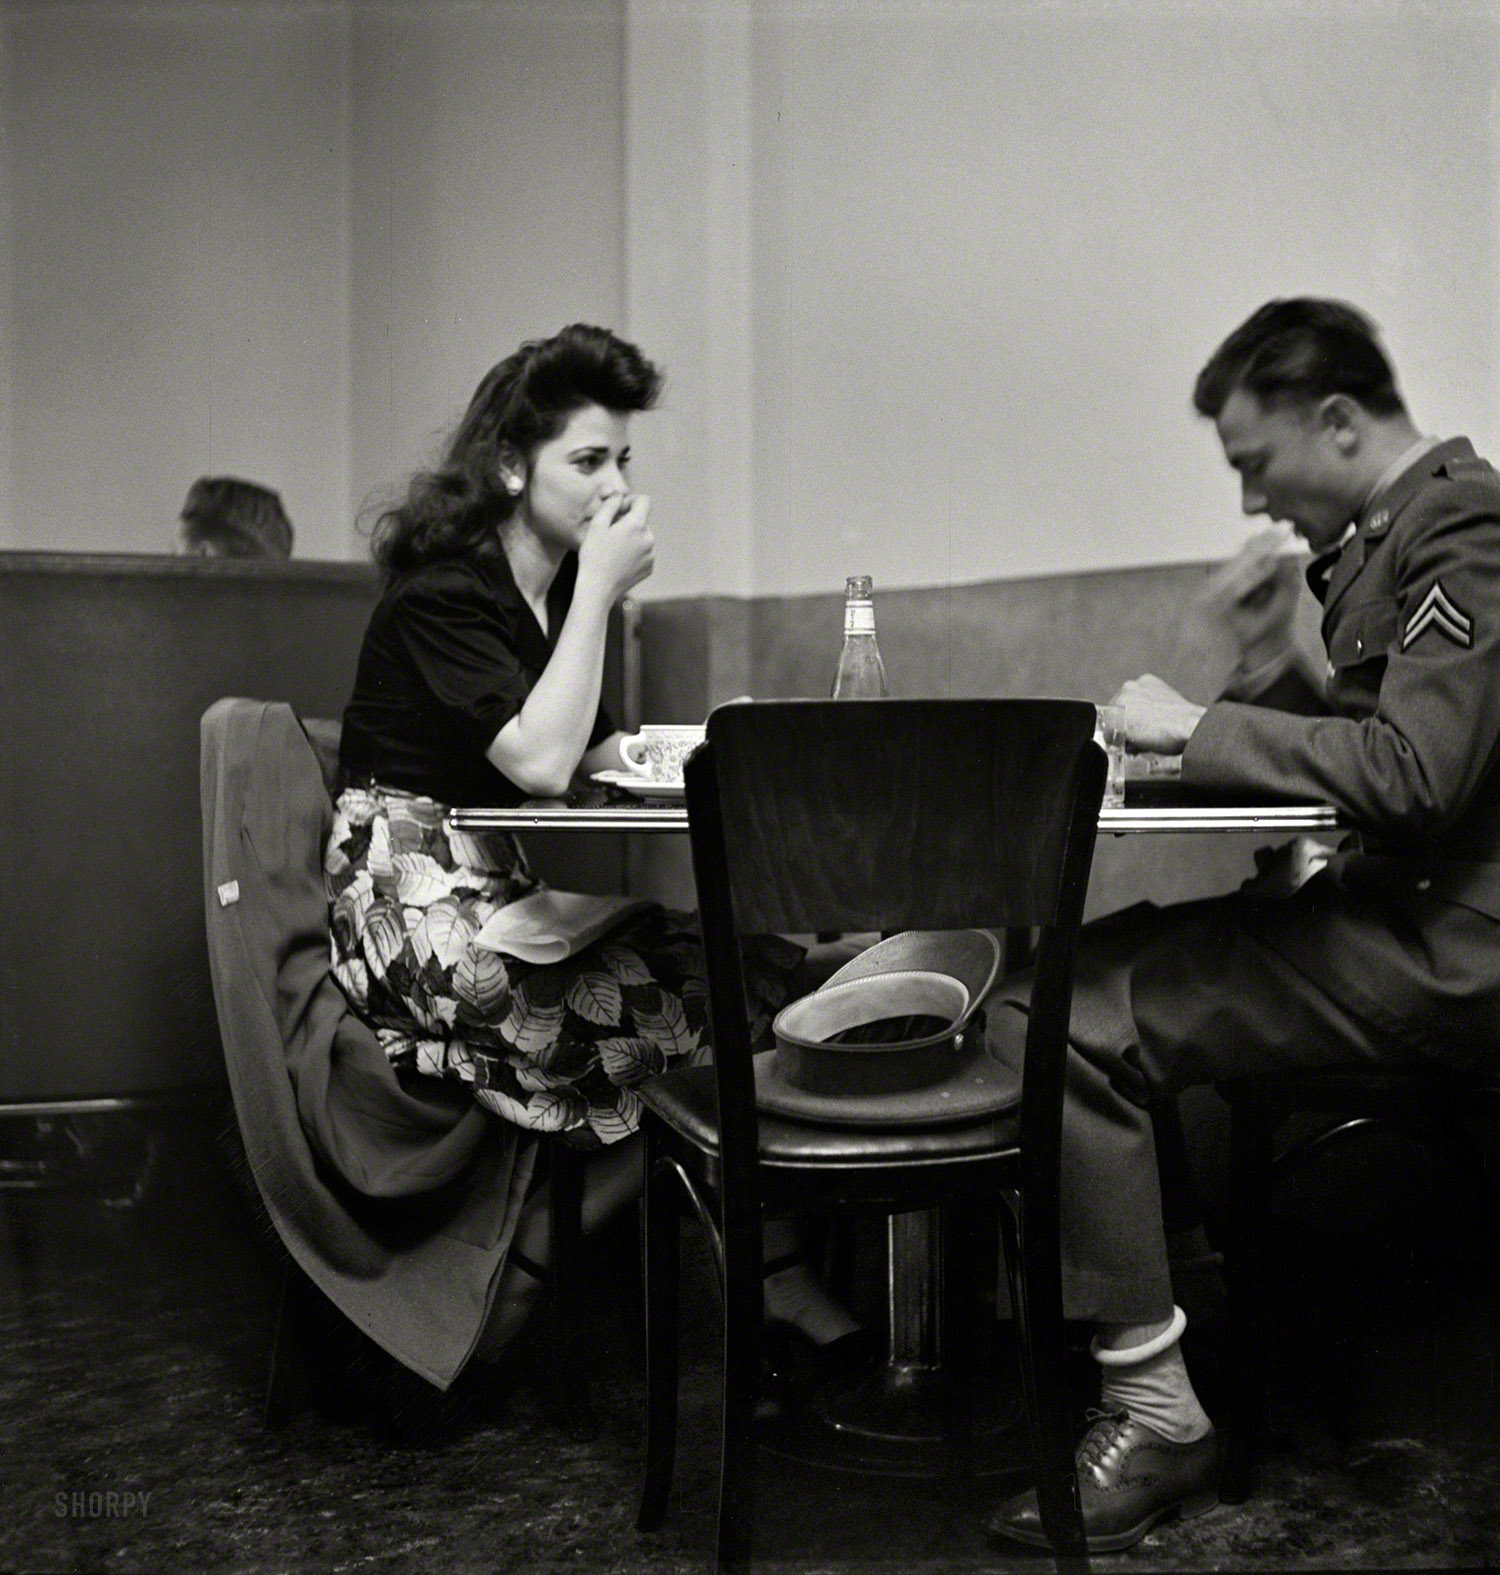 May 1942. "A corporal in the Army takes his girl to dinner. Bakersfield, California." Photo by Russell Lee, Office of War Information. View full size.